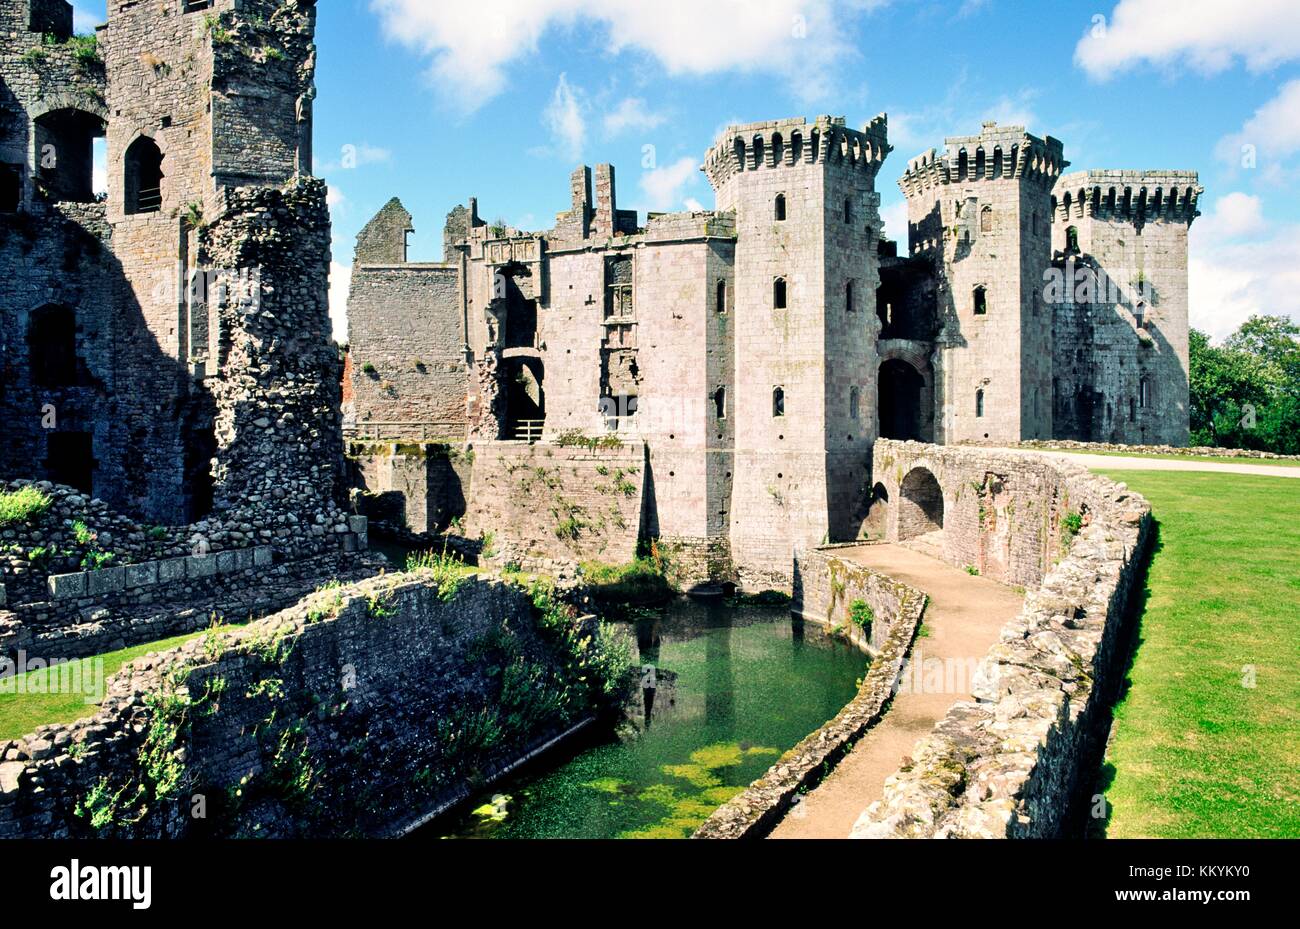 Raglan Castle near Monmouth in Gwent, east Wales, UK showing the moat, walls and entrance towers Stock Photo